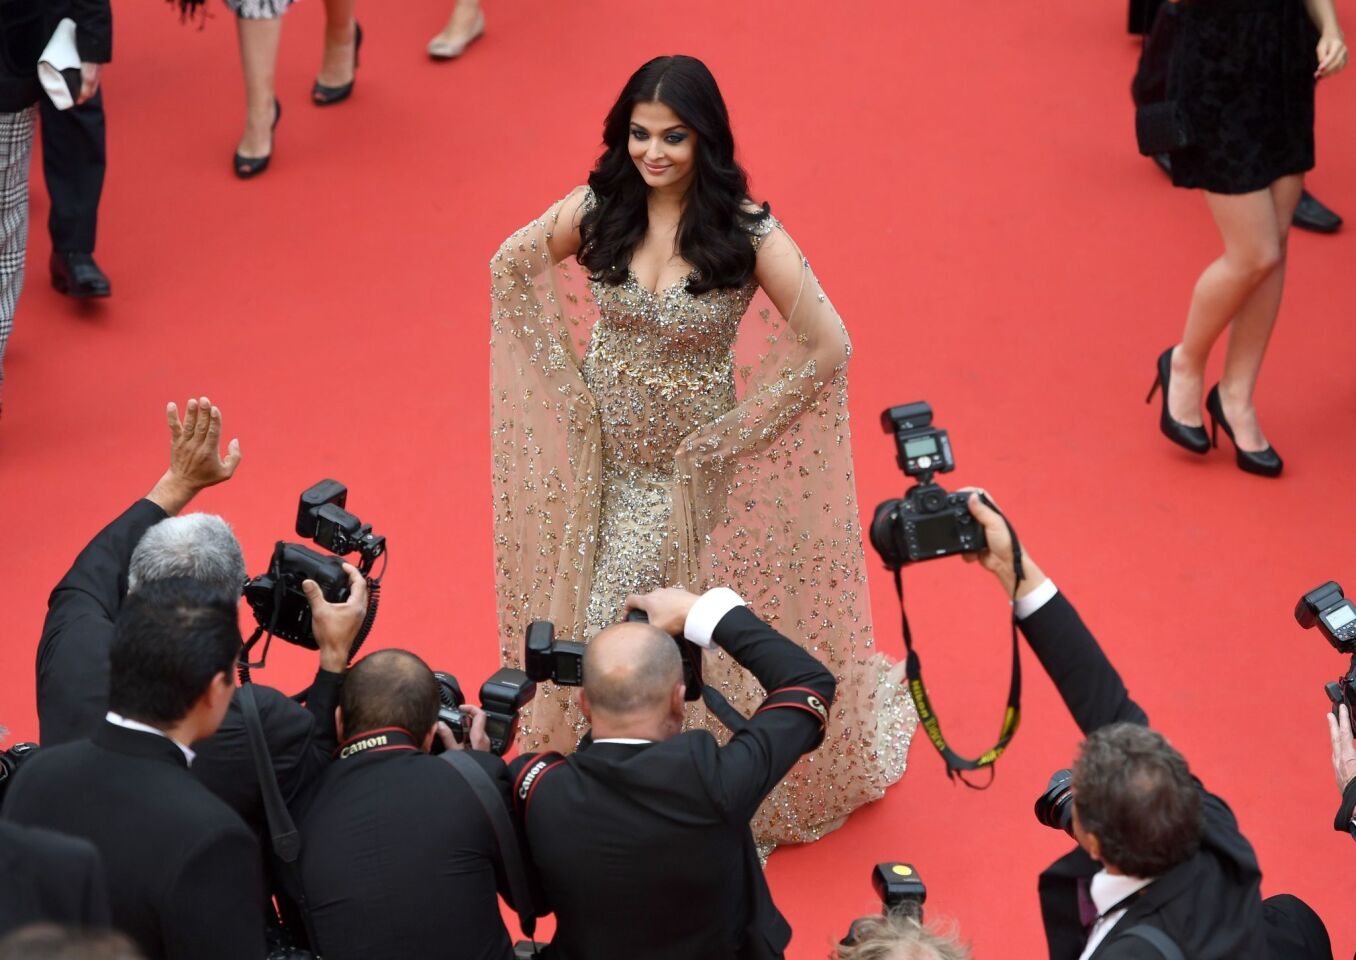 Aishwarya Rai poses for the cameras at the Cannes Film Festival premiere of "Ma Loute (Slack Bay)" on May 13.